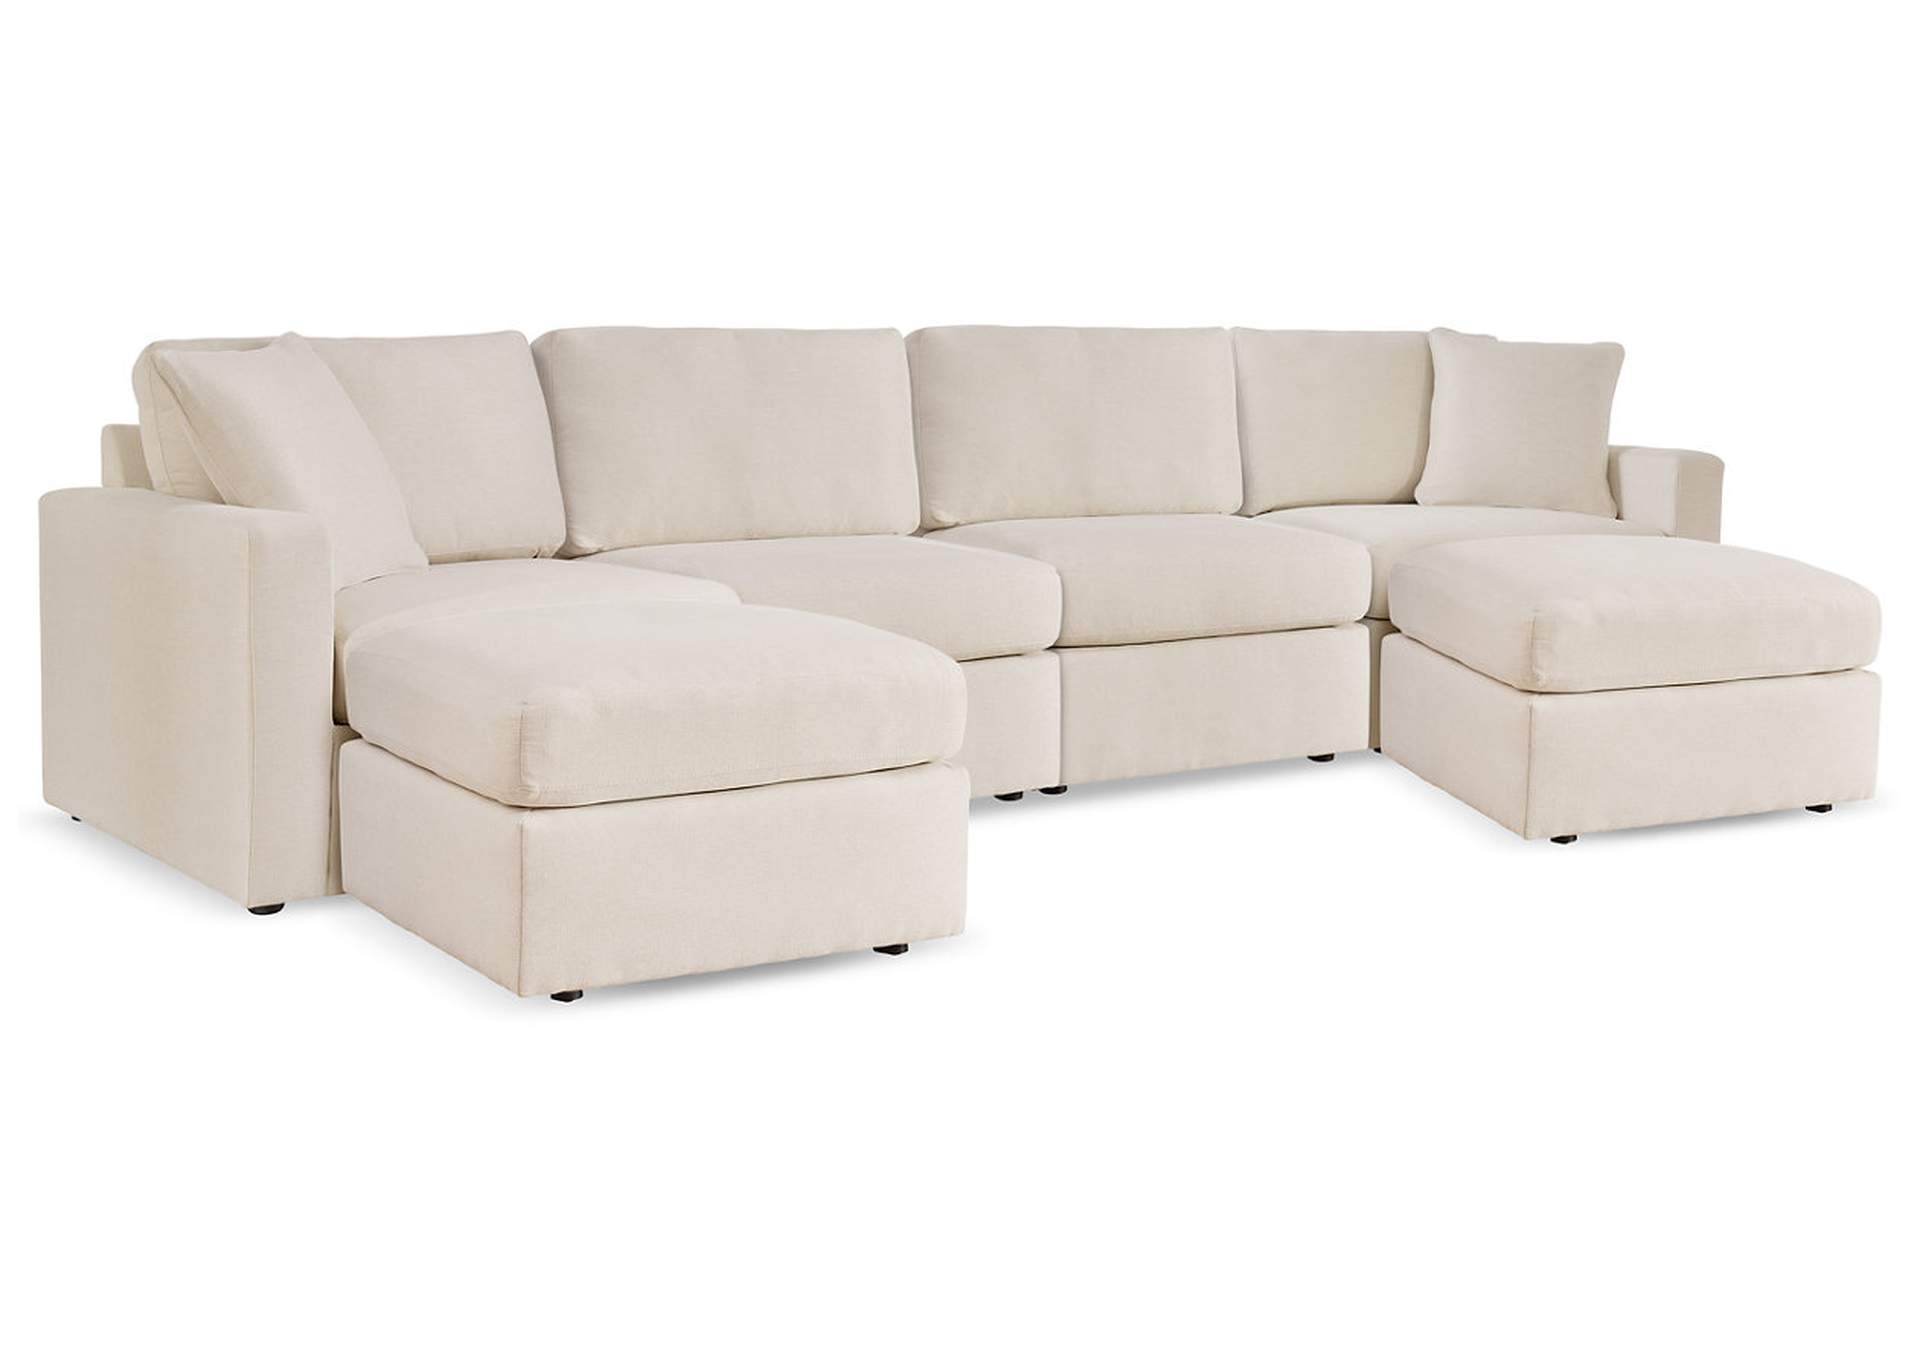 Pillar Peak 4-Piece Sectional with Ottoman,Signature Design By Ashley